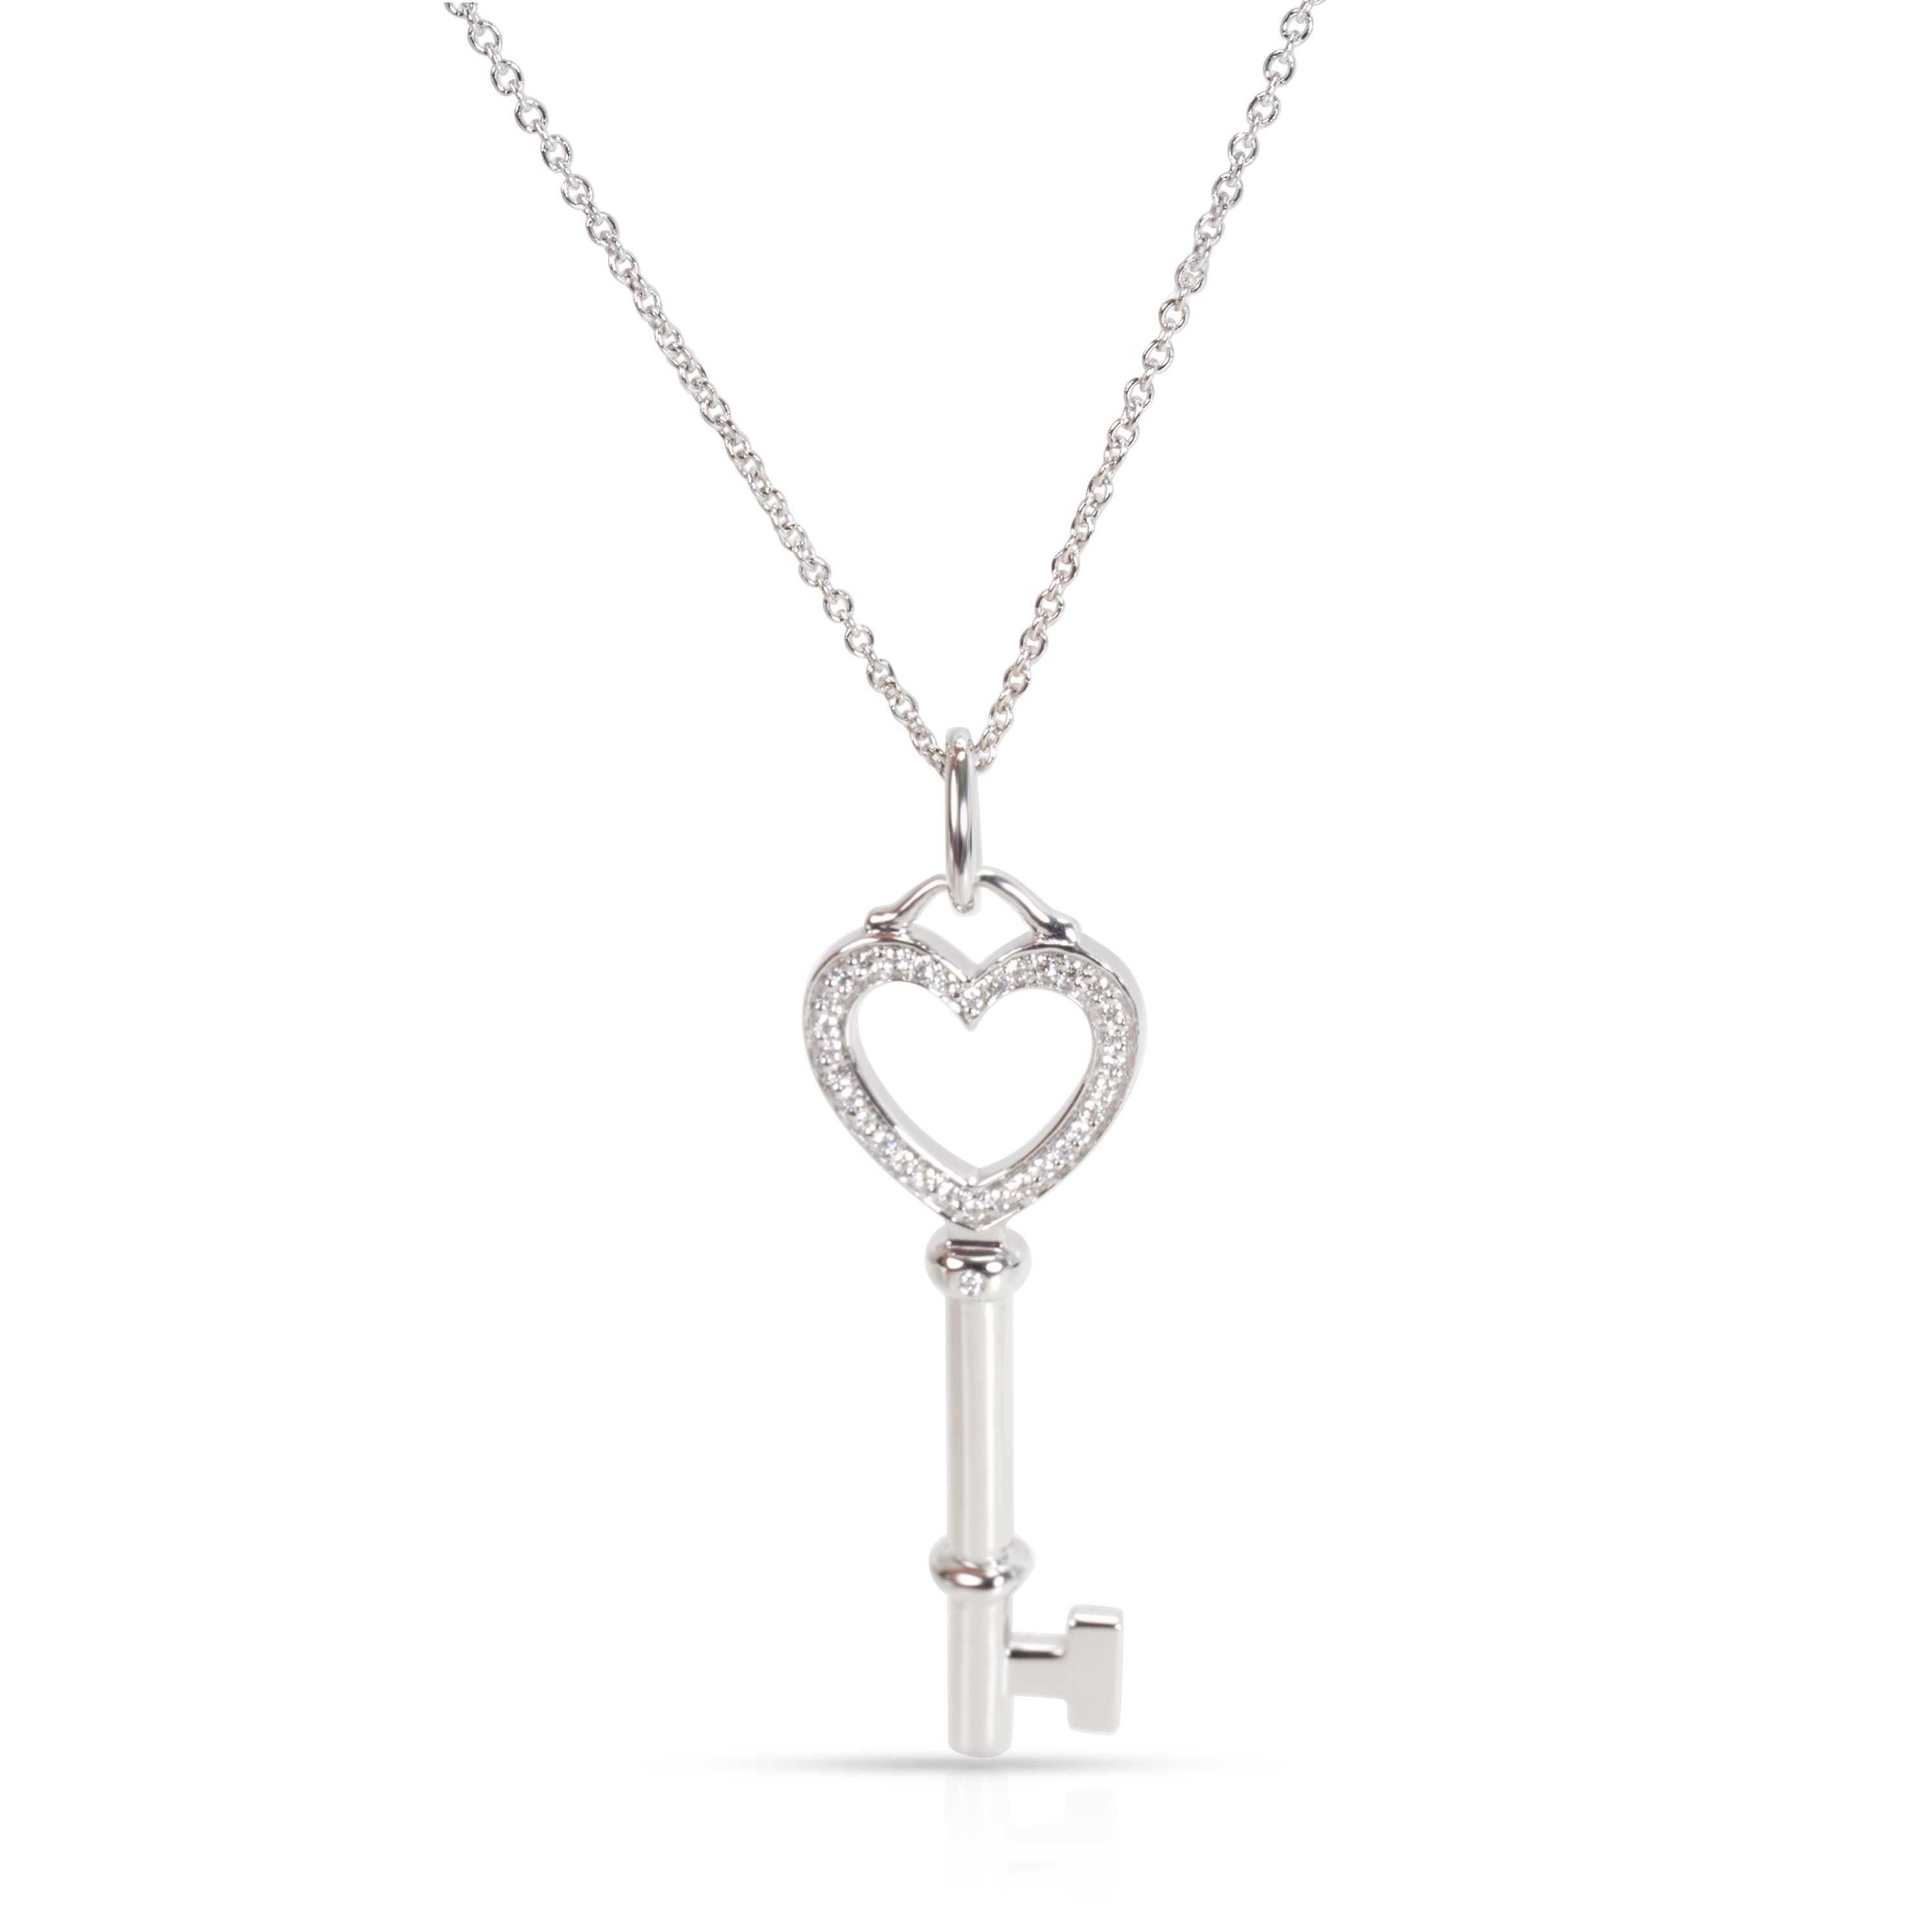 Details About Tiffany & Co. Medium Key Diamond Necklace In 18k White Gold   (View 10 of 25)